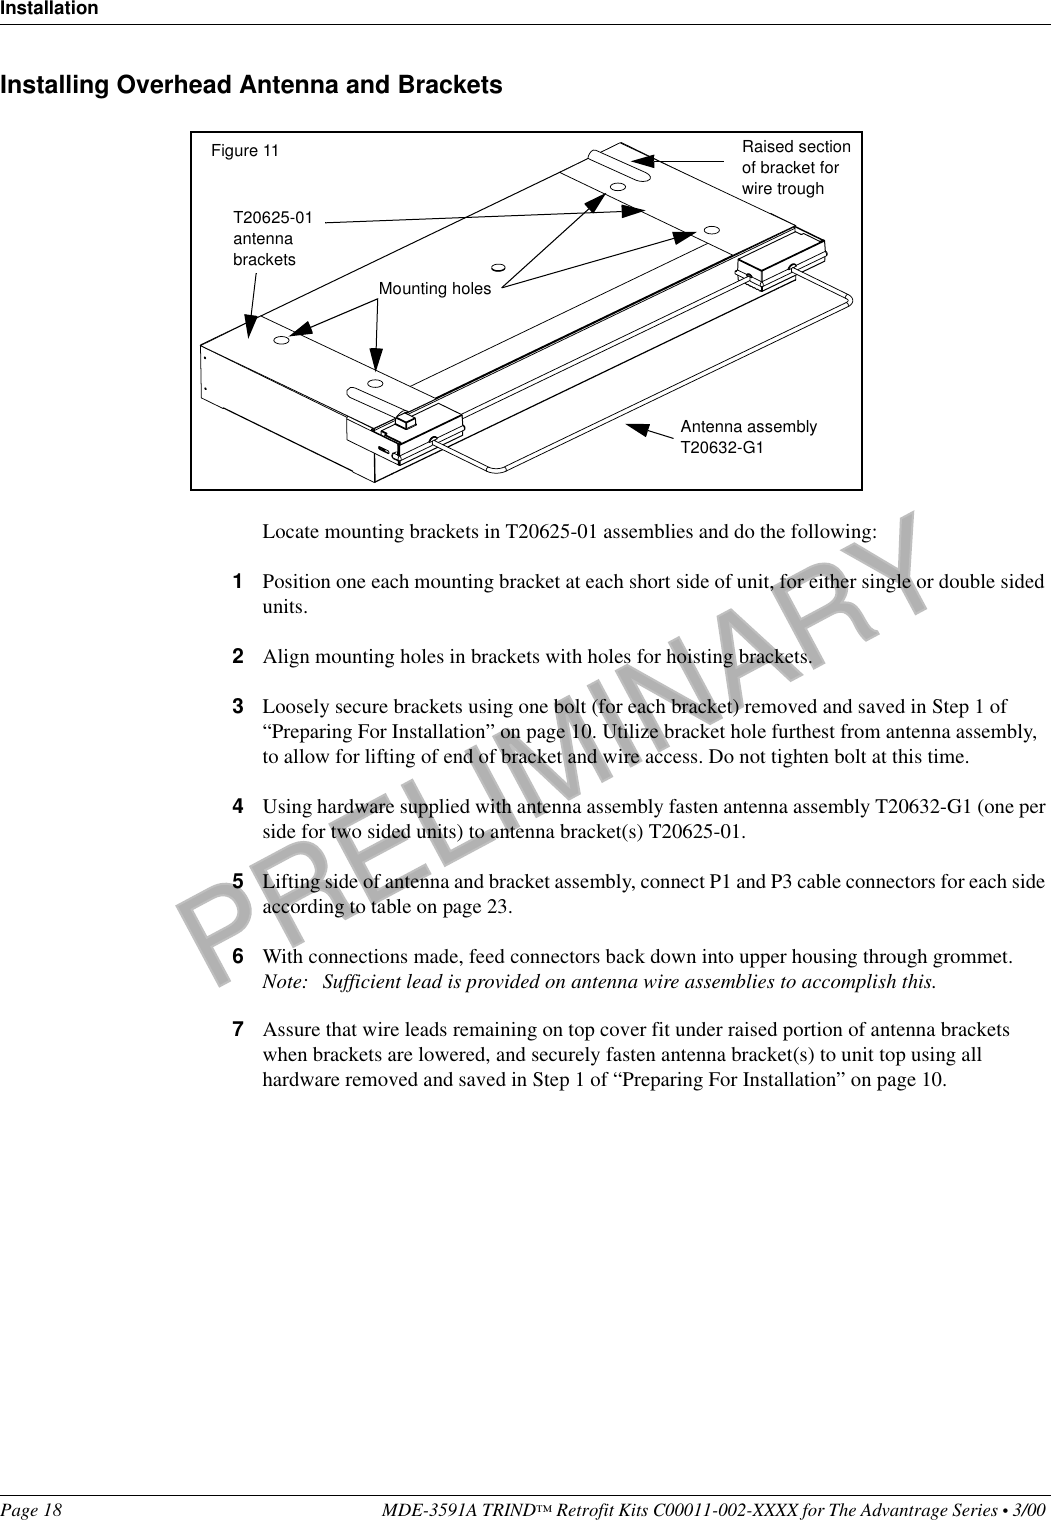 PRELIMINARYInstallationPage 18 MDE-3591A TRIND™ Retrofit Kits C00011-002-XXXX for The Advantrage Series • 3/00 Installing Overhead Antenna and BracketsLocate mounting brackets in T20625-01 assemblies and do the following:1Position one each mounting bracket at each short side of unit, for either single or double sided units.2Align mounting holes in brackets with holes for hoisting brackets.3Loosely secure brackets using one bolt (for each bracket) removed and saved in Step 1 of “Preparing For Installation” on page 10. Utilize bracket hole furthest from antenna assembly, to allow for lifting of end of bracket and wire access. Do not tighten bolt at this time.4Using hardware supplied with antenna assembly fasten antenna assembly T20632-G1 (one per side for two sided units) to antenna bracket(s) T20625-01.5Lifting side of antenna and bracket assembly, connect P1 and P3 cable connectors for each side according to table on page 23.6With connections made, feed connectors back down into upper housing through grommet.Note: Sufficient lead is provided on antenna wire assemblies to accomplish this.7Assure that wire leads remaining on top cover fit under raised portion of antenna brackets when brackets are lowered, and securely fasten antenna bracket(s) to unit top using all hardware removed and saved in Step 1 of “Preparing For Installation” on page 10.T20625-01 antenna bracketsMounting holesAntenna assembly T20632-G1Raised section of bracket for wire troughFigure 11